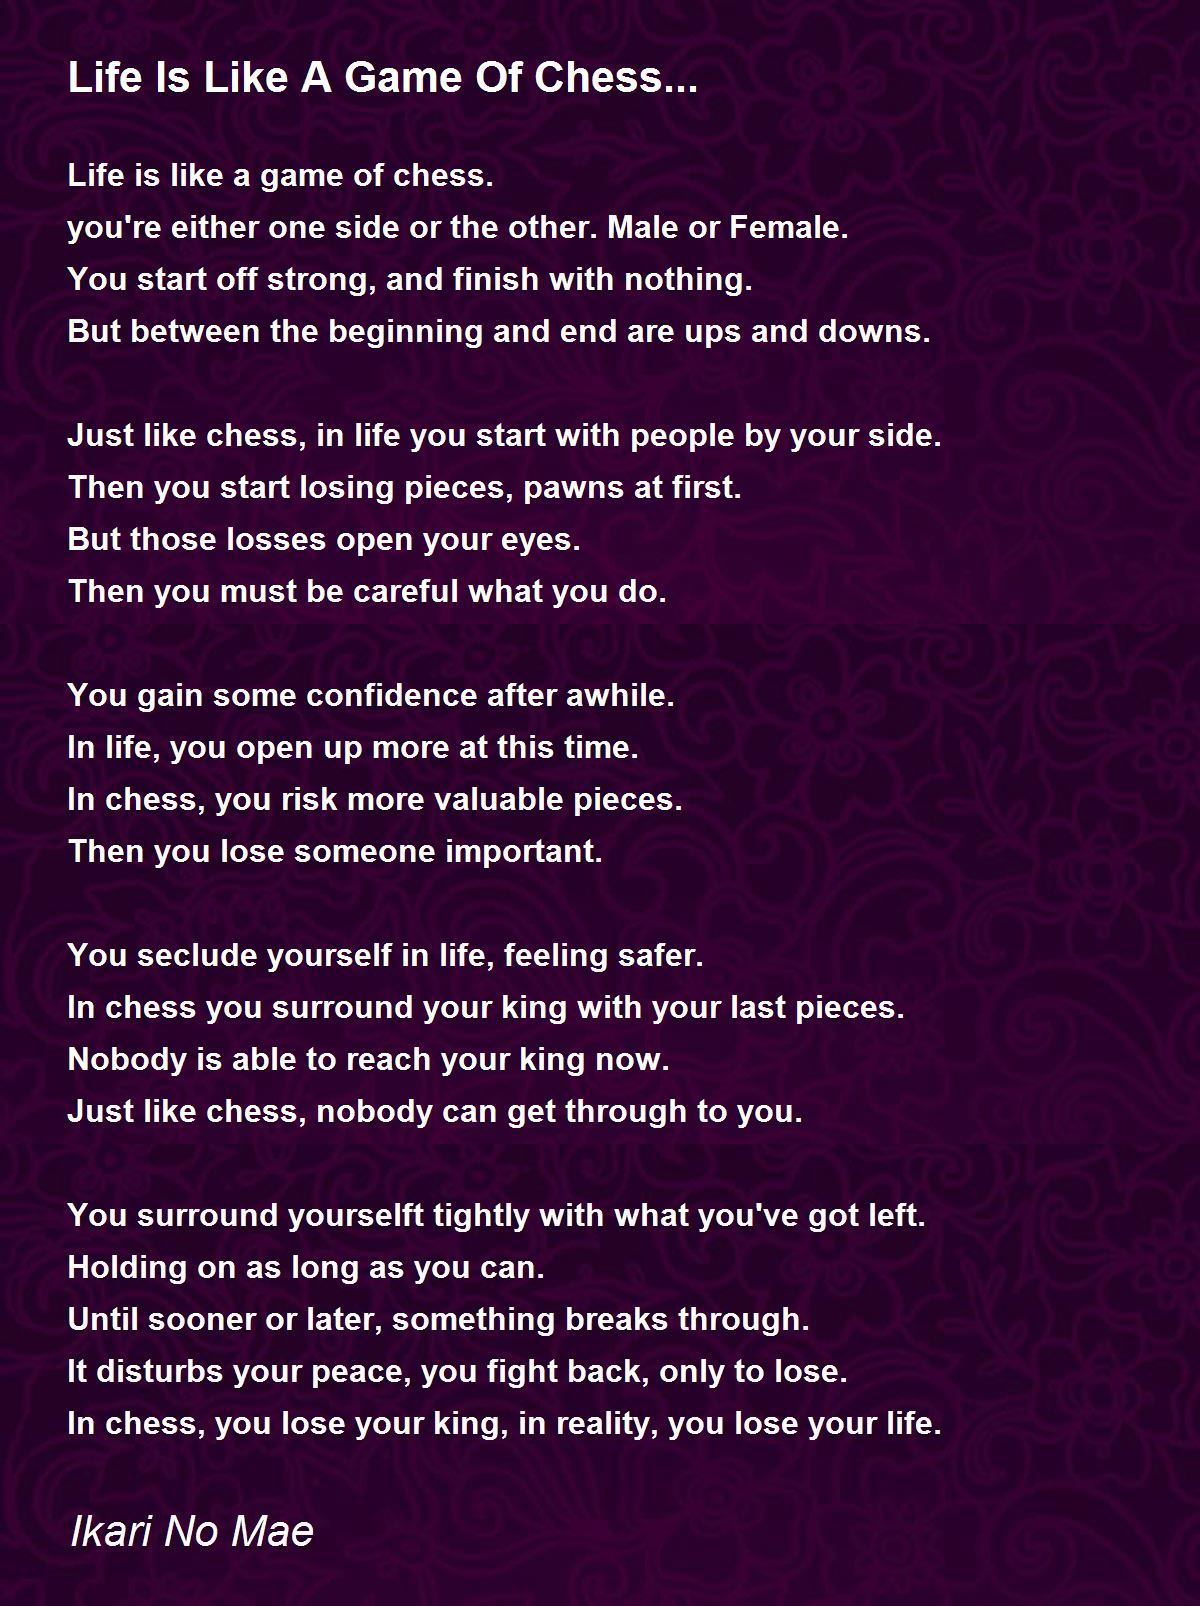 Life Is Like A Game Of Chess - Life Is Like A Game Of Chess Poem by  Ikari No Mae